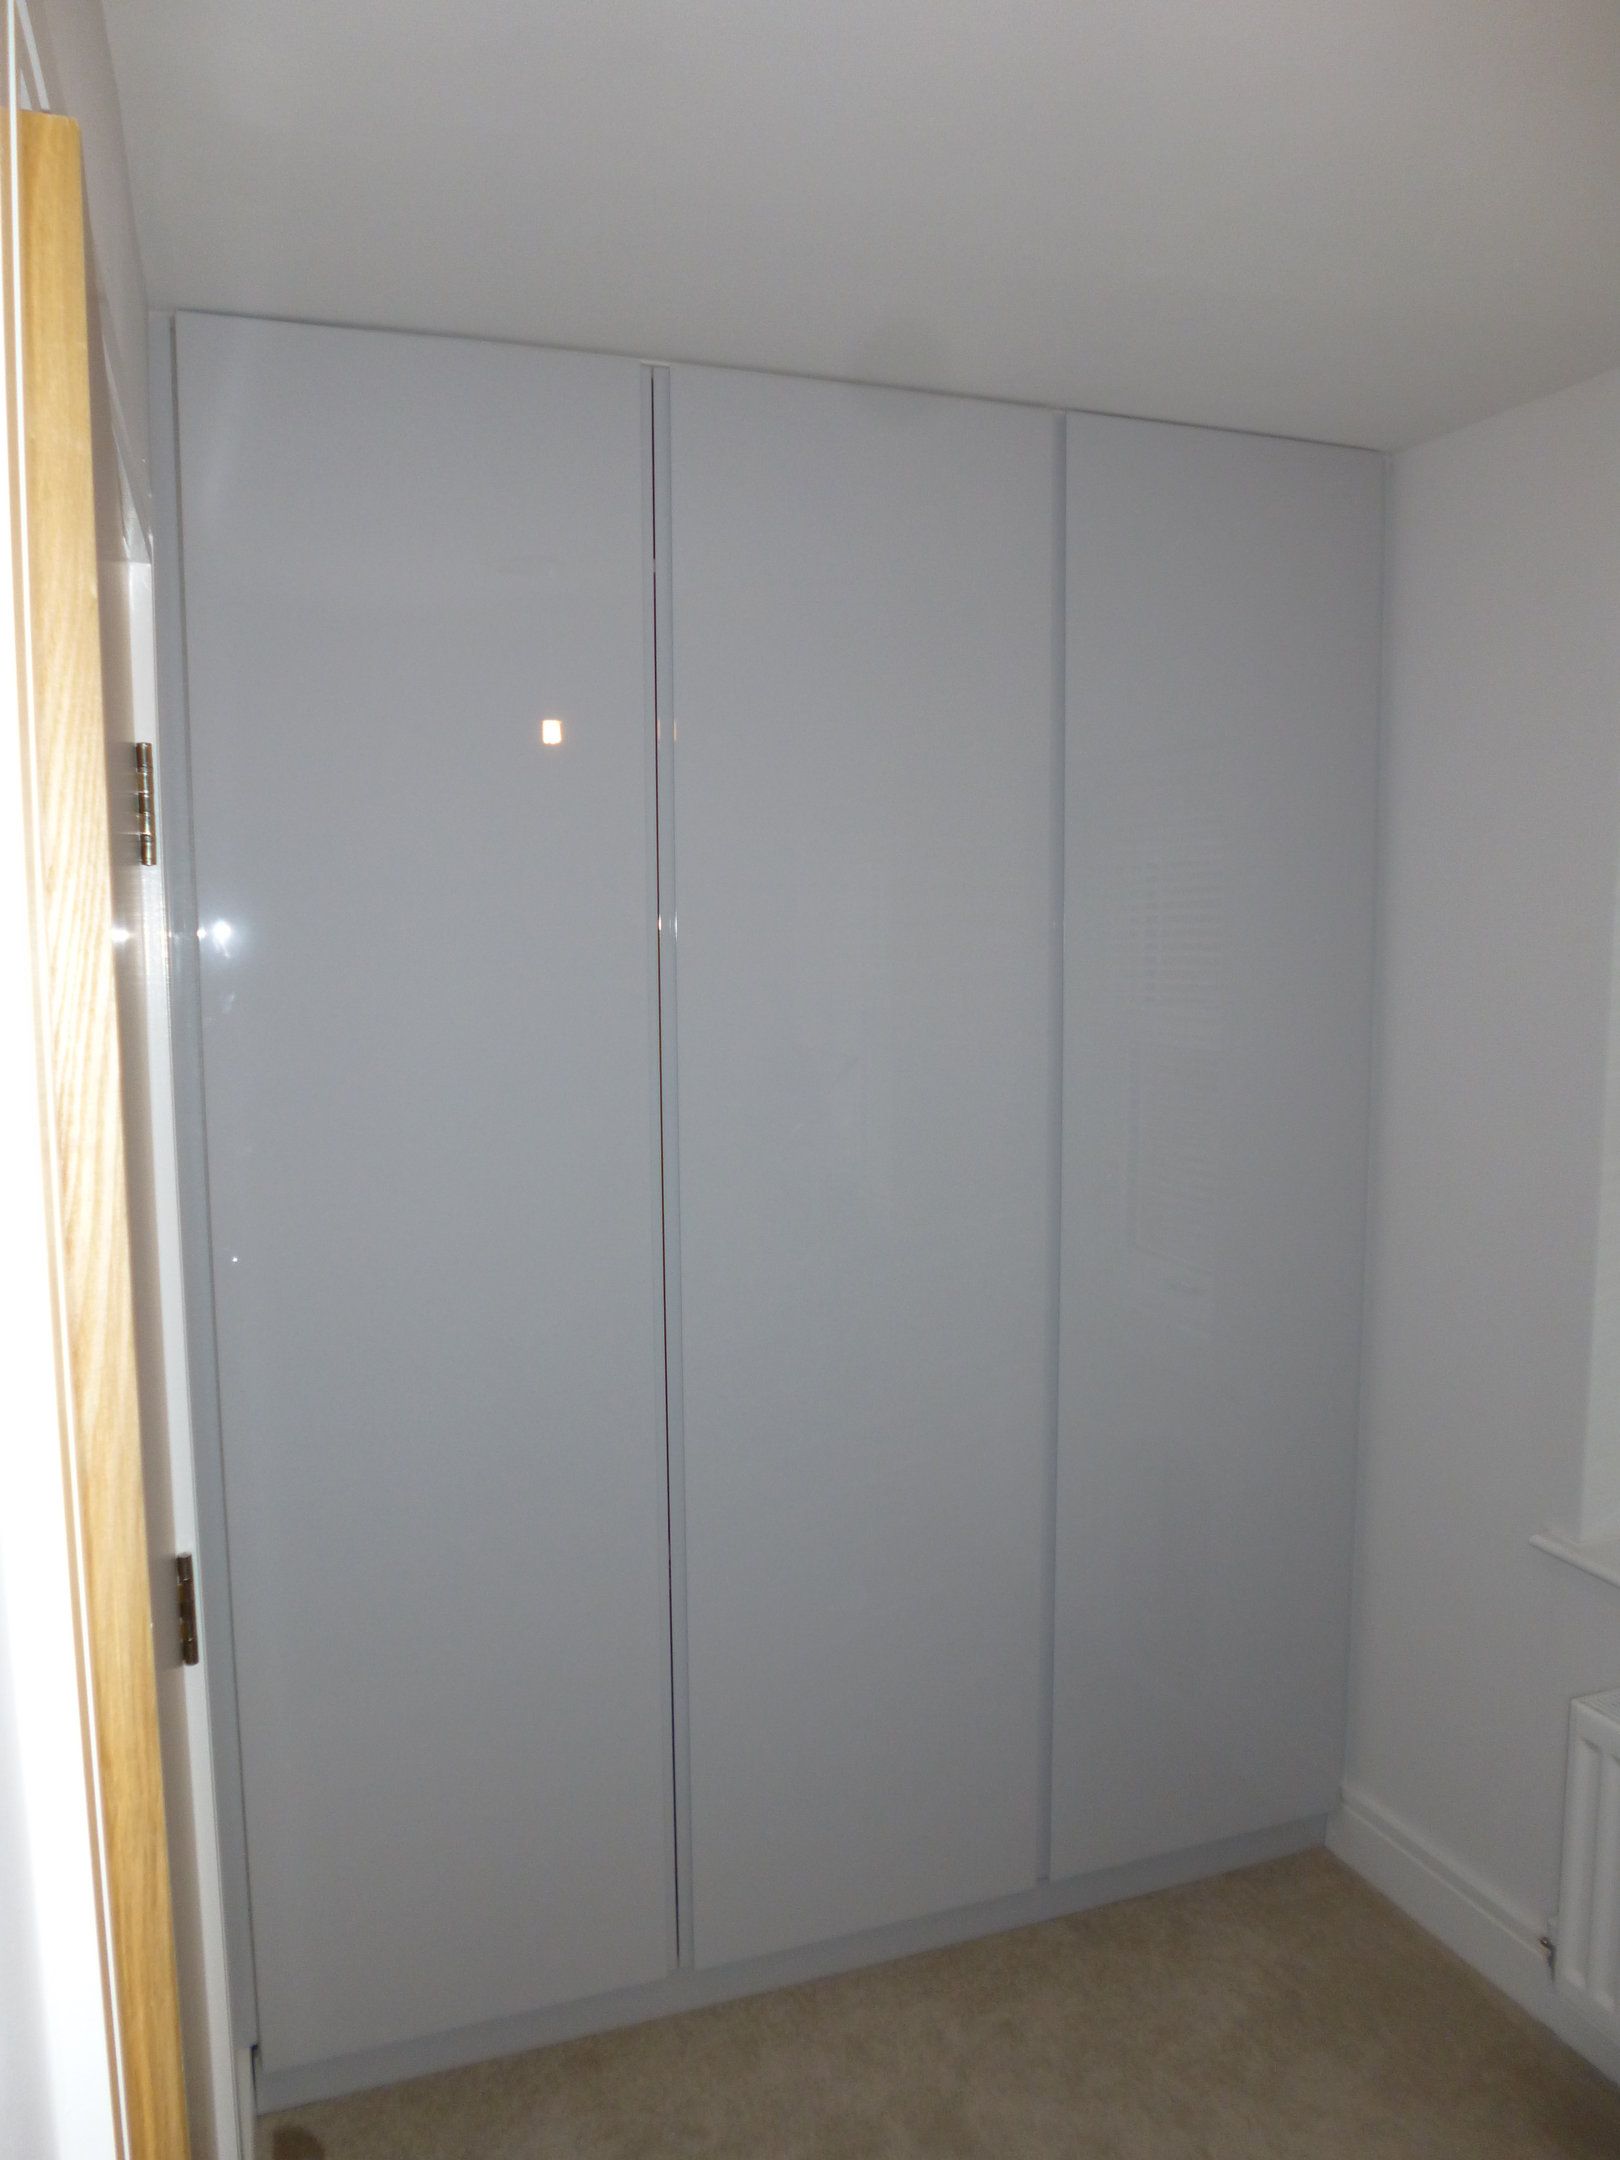 Hinged-door wardrobes pine painted white handle less hinged doors wardrobe made from spray painted high gloss mdf AZXJKXJ